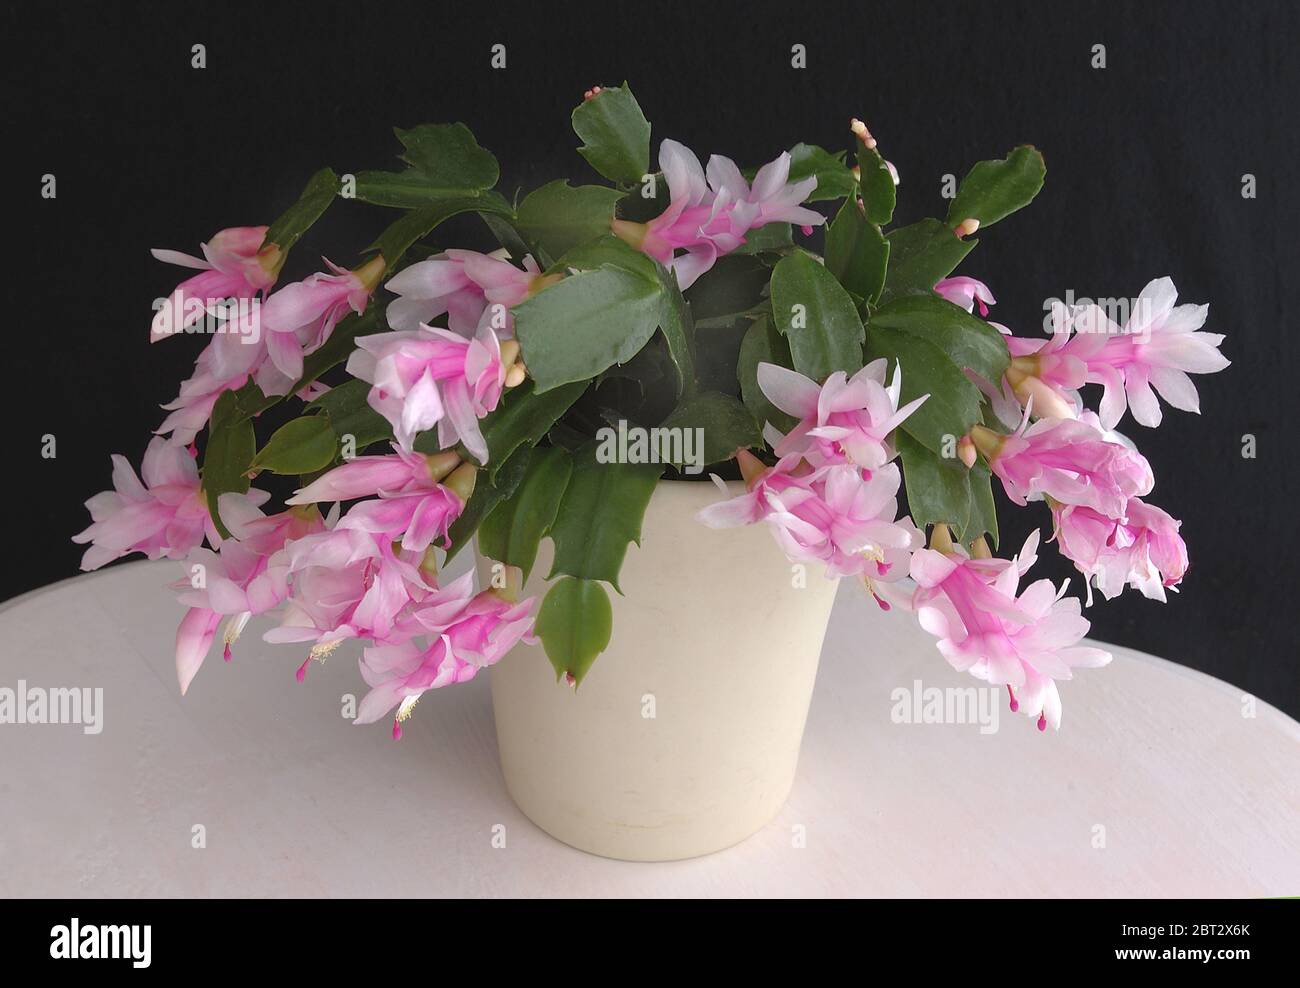 Holiday Cactus, Zygocactus, rose Banque D'Images